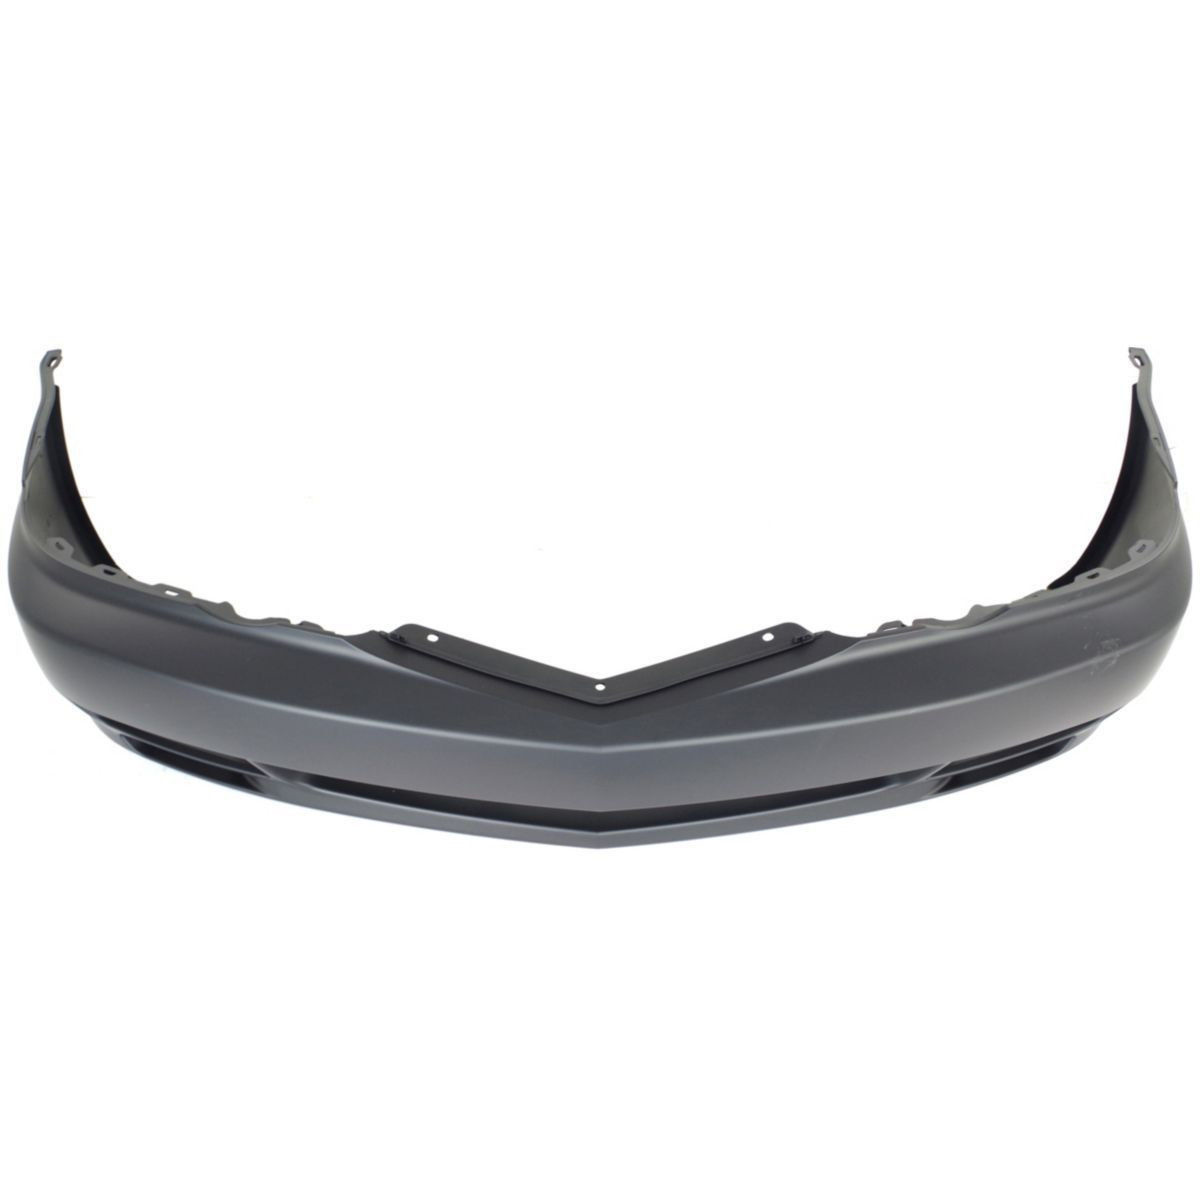 2002-2003 ACURA 3.2TL Front Bumper Cover Painted to Match